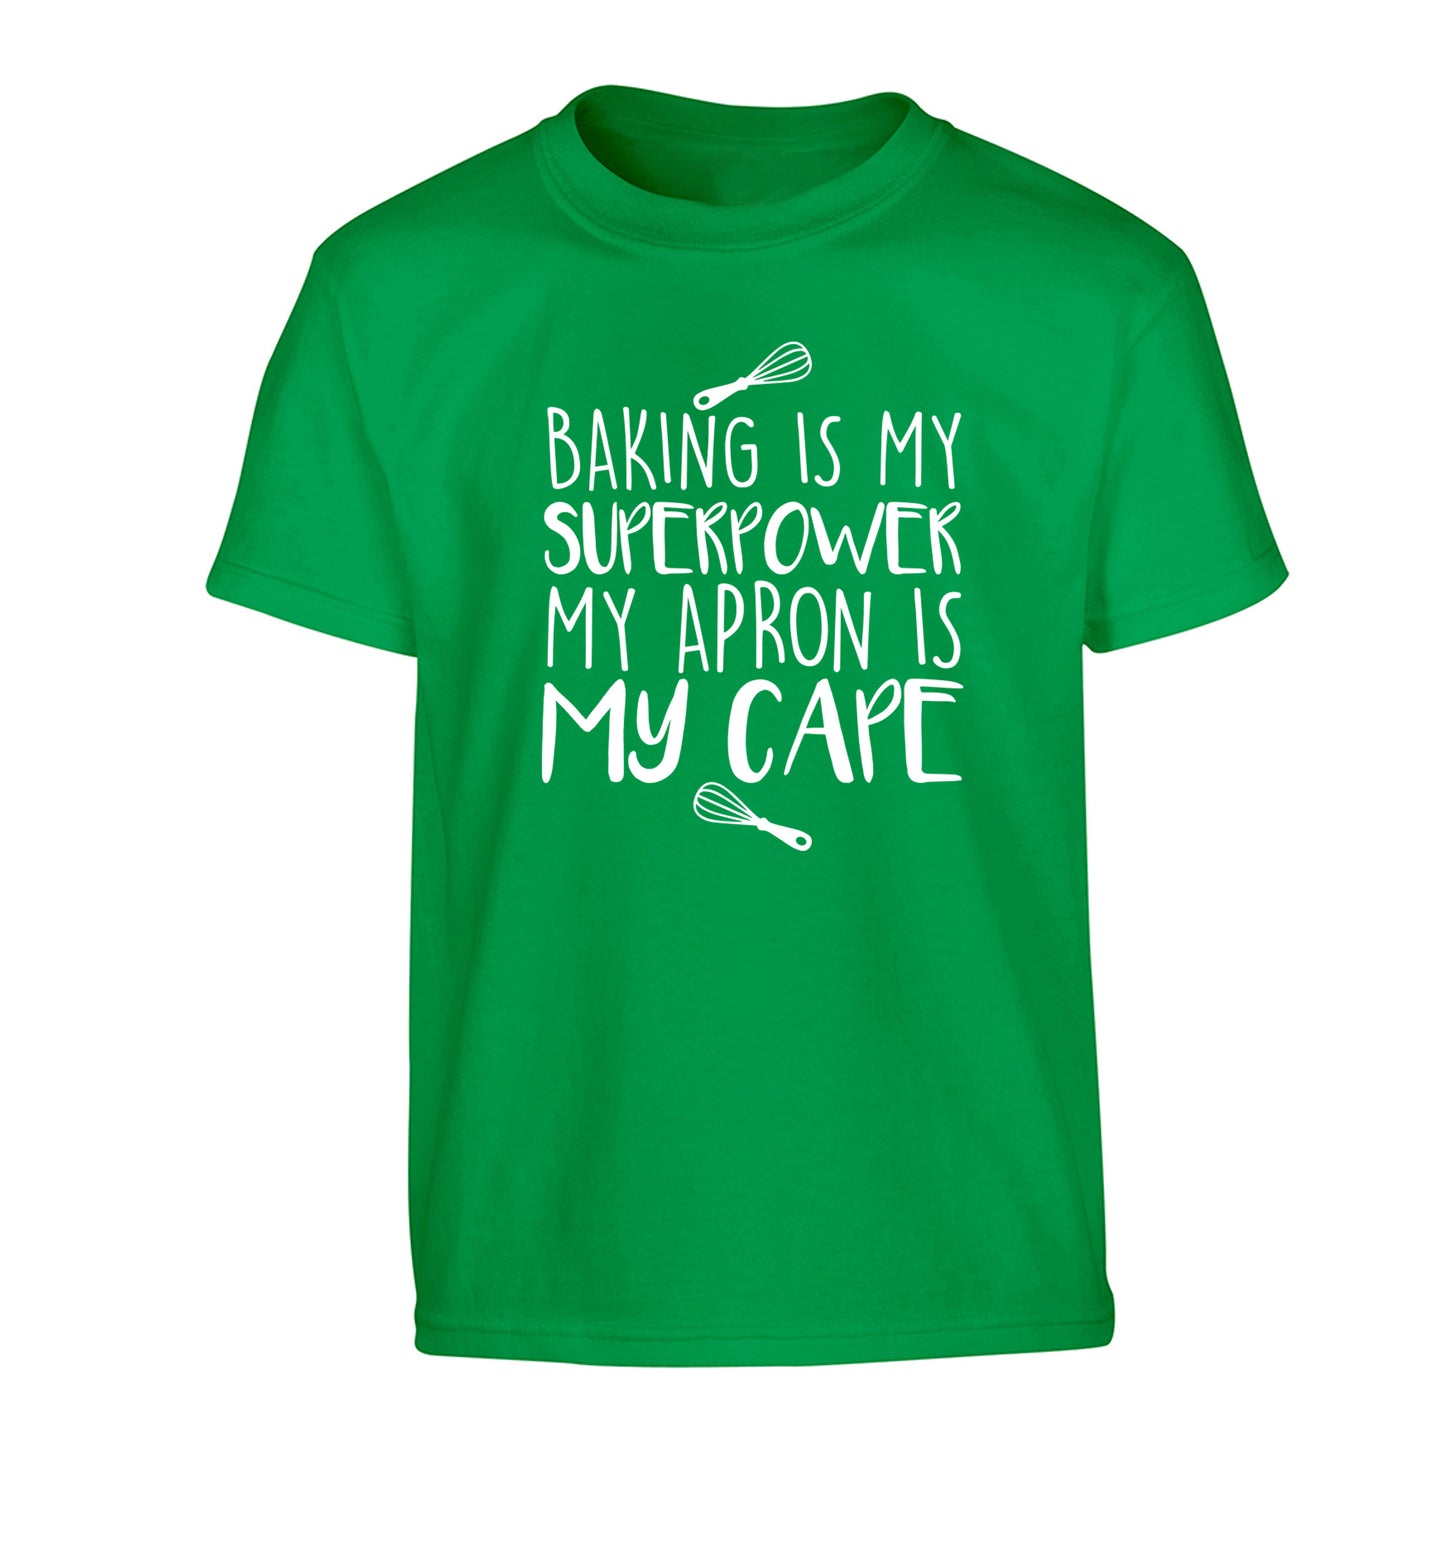 Baking is my superpower my apron is my cape Children's green Tshirt 12-14 Years